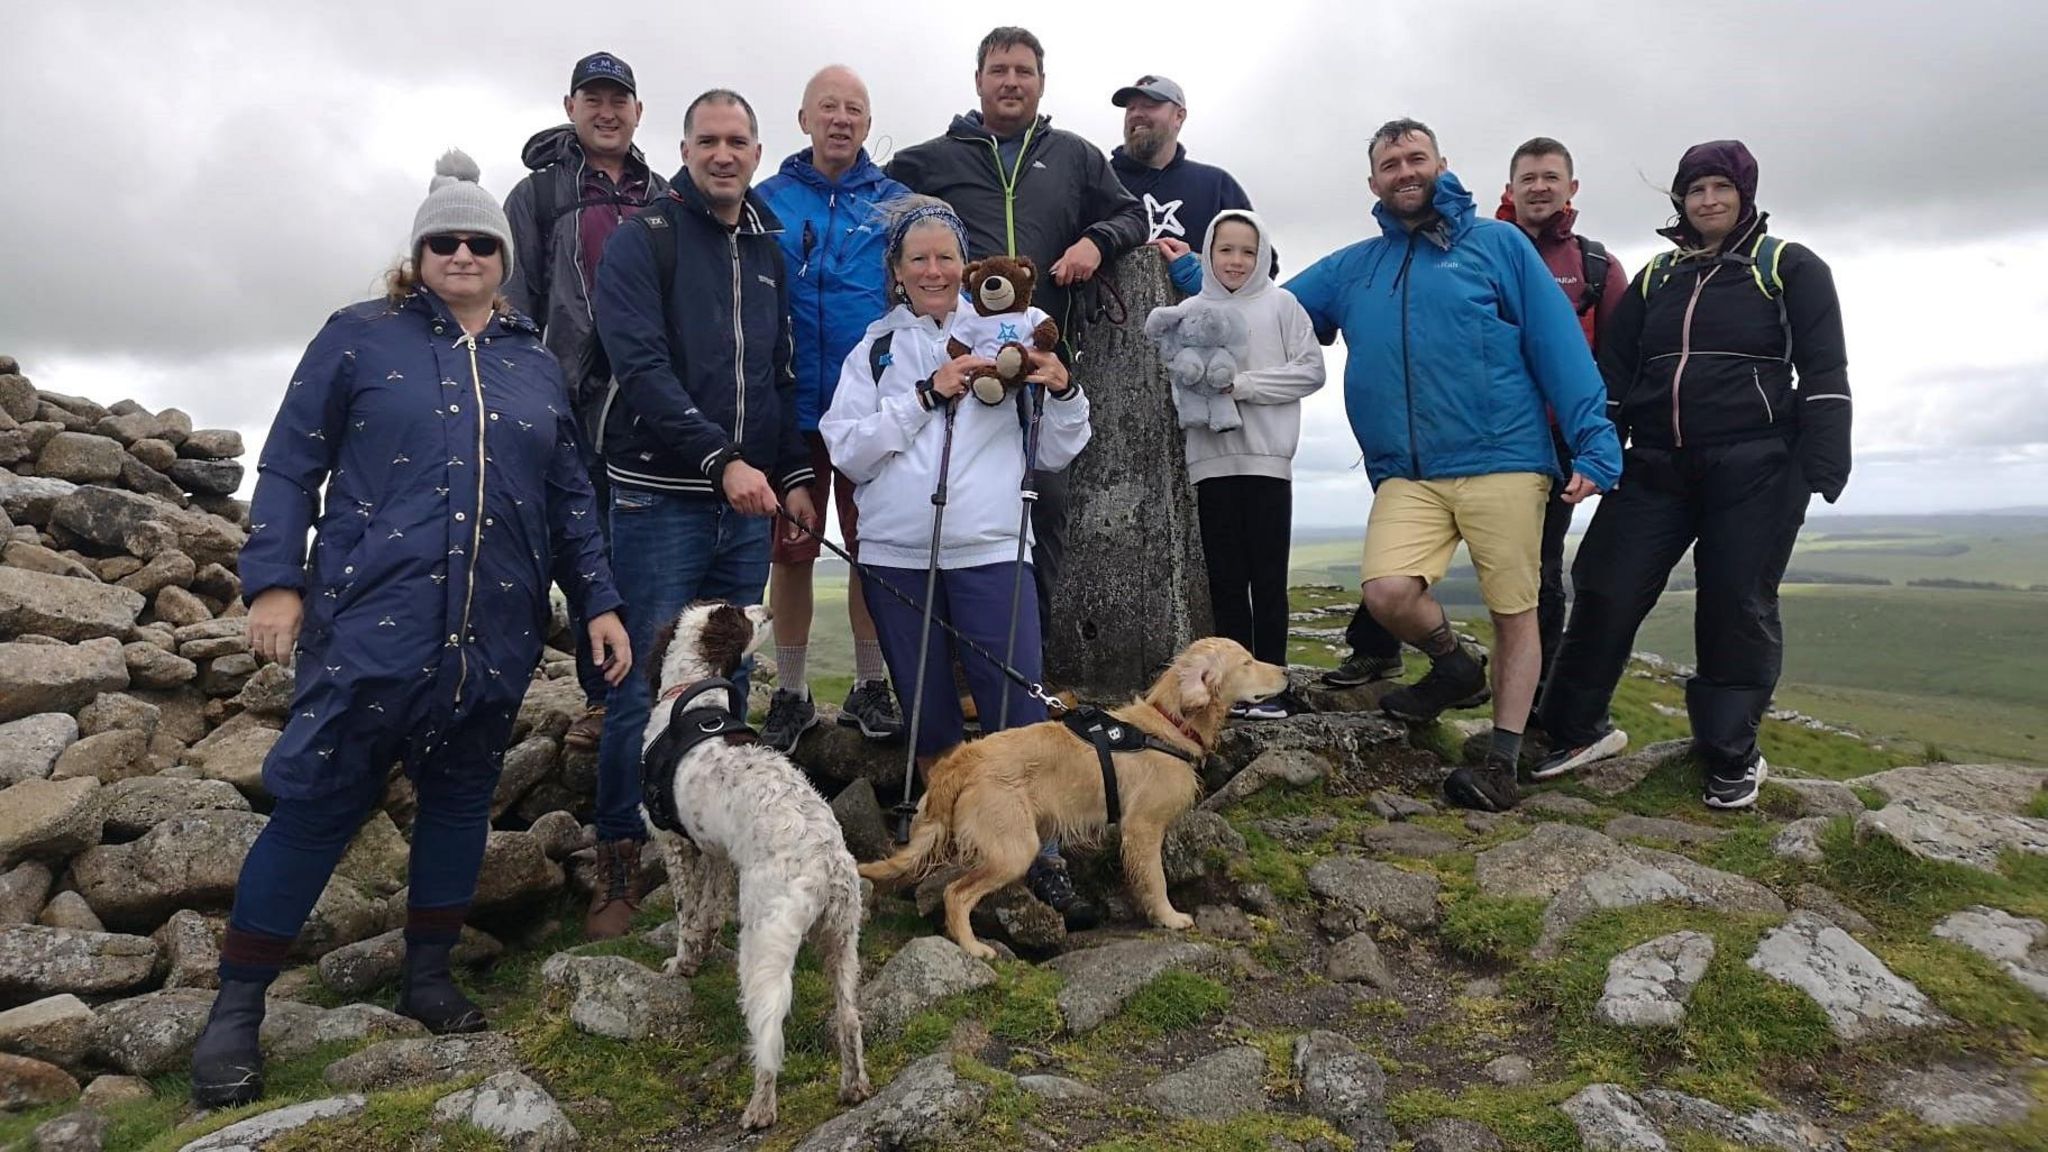 A large group of people and two dogs on a hilltop